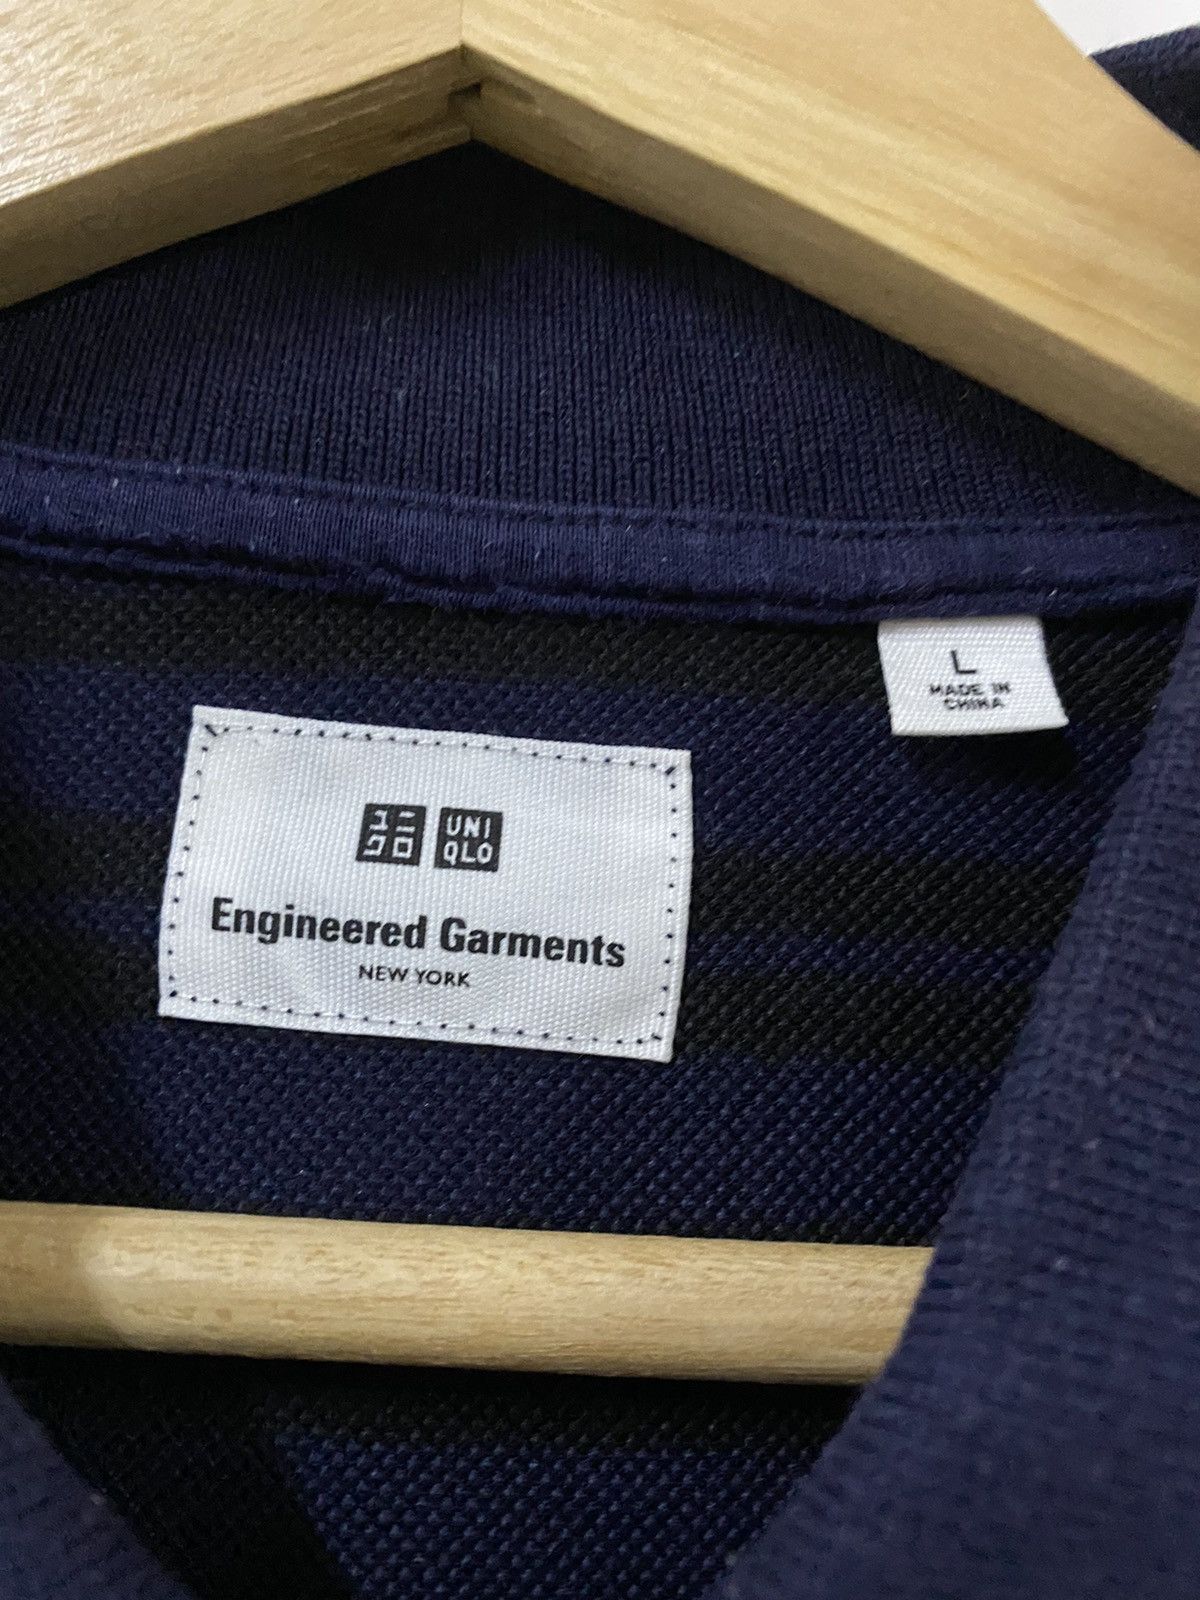 Rare Enginereed Garment Uniqlo Reconstructed Striped Pocket - 17